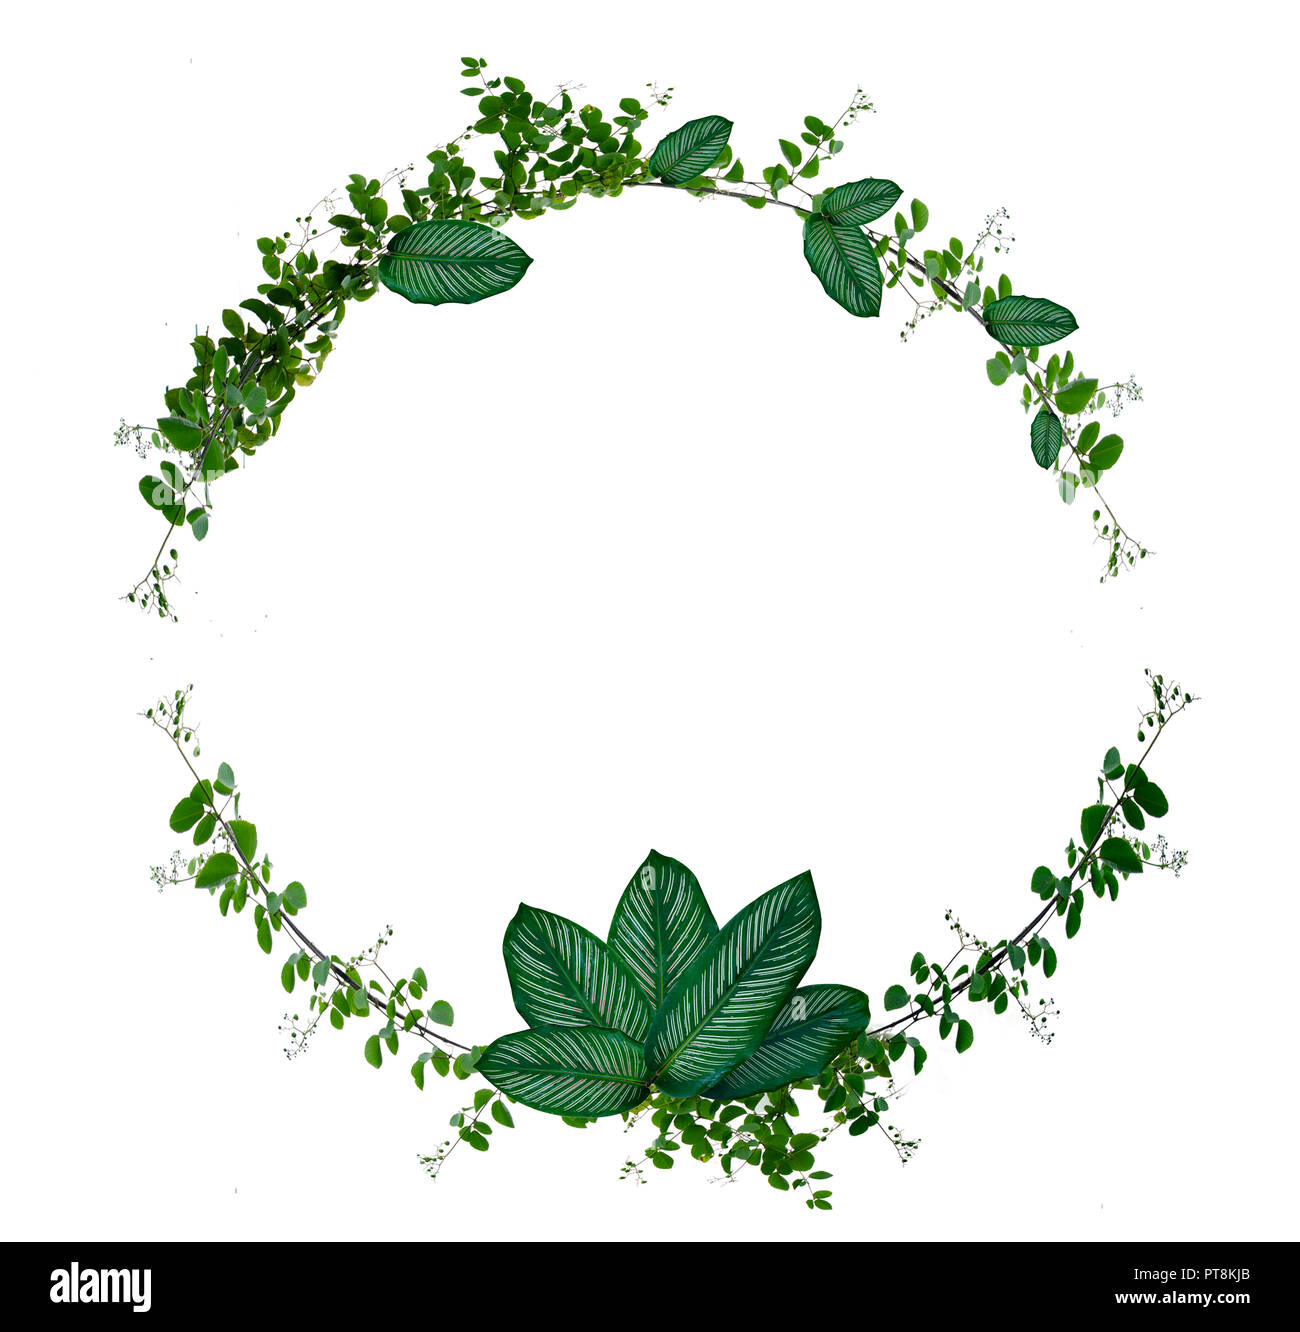 Vine and leaf monstera Circle of Isolates Used in design Border Frame made  of Green climbing plant isolated on white background Stock Photo - Alamy